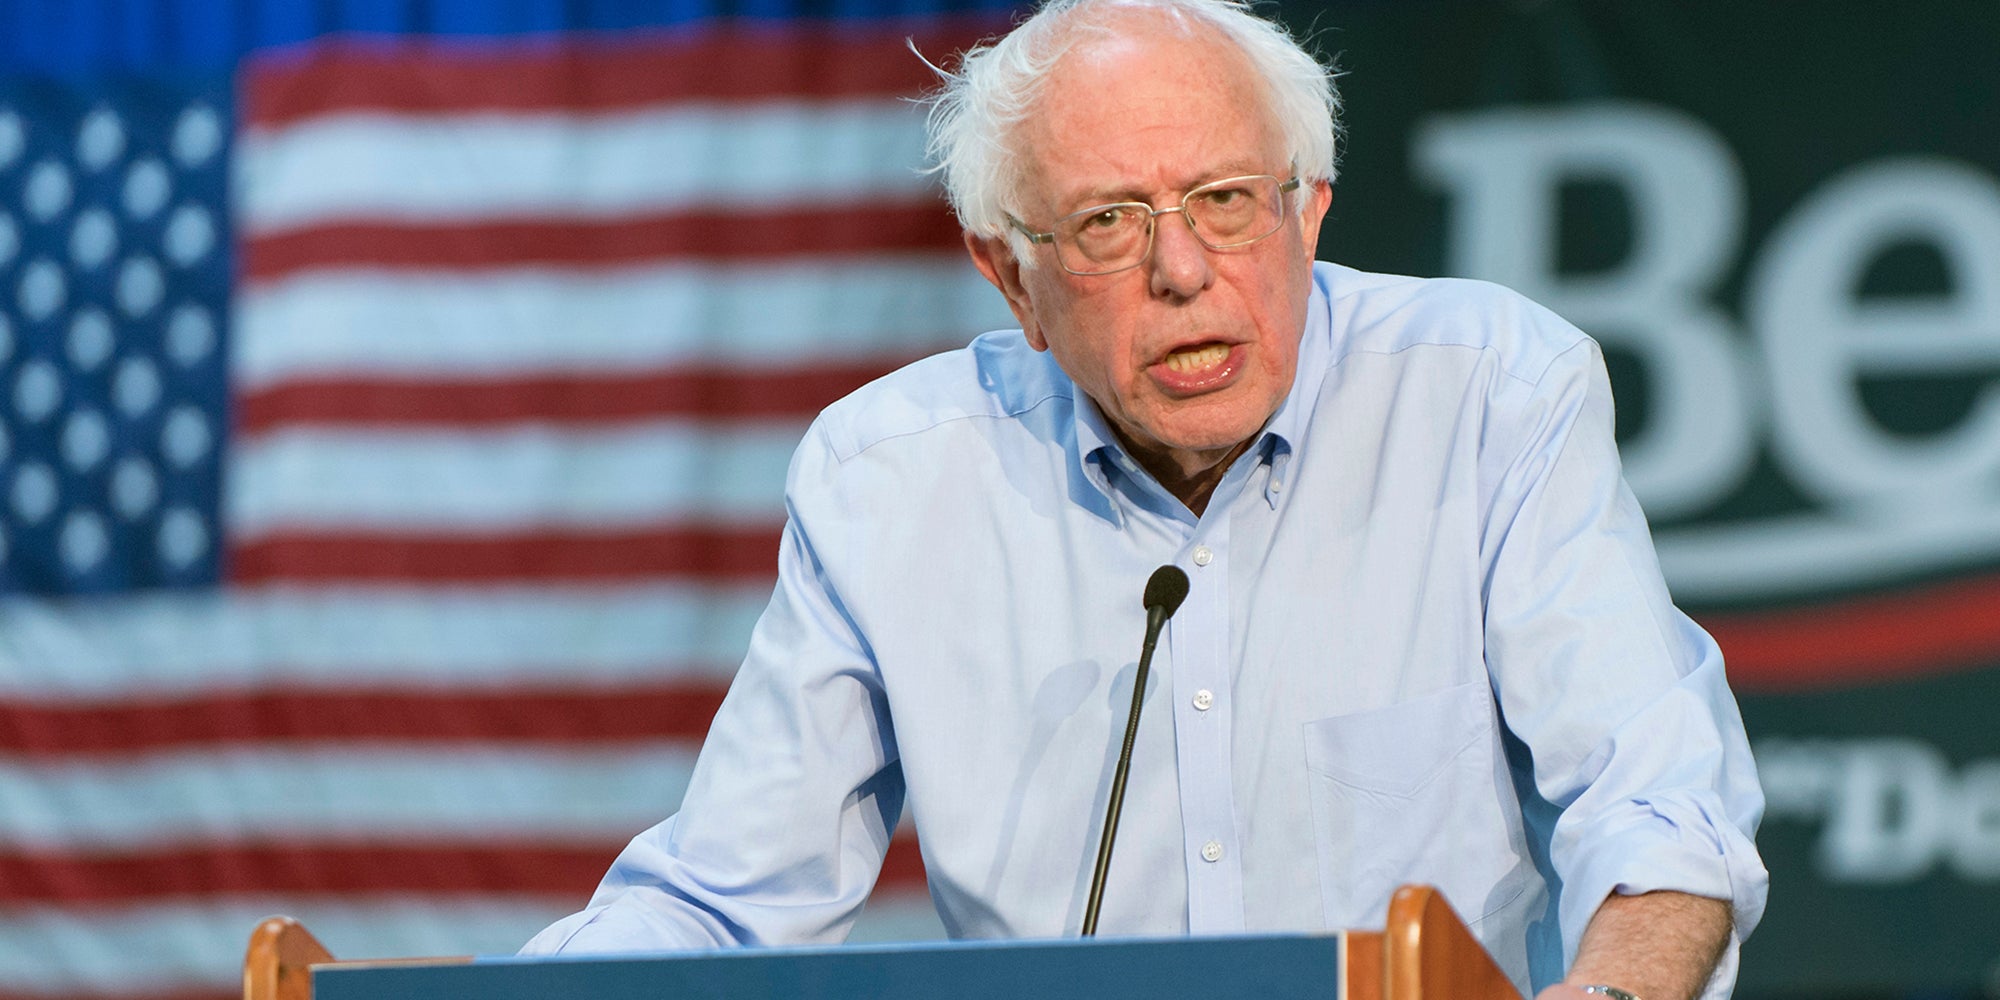 The Bernie campaign needs to be careful it doesn't end up doing Donald Trump's job for him